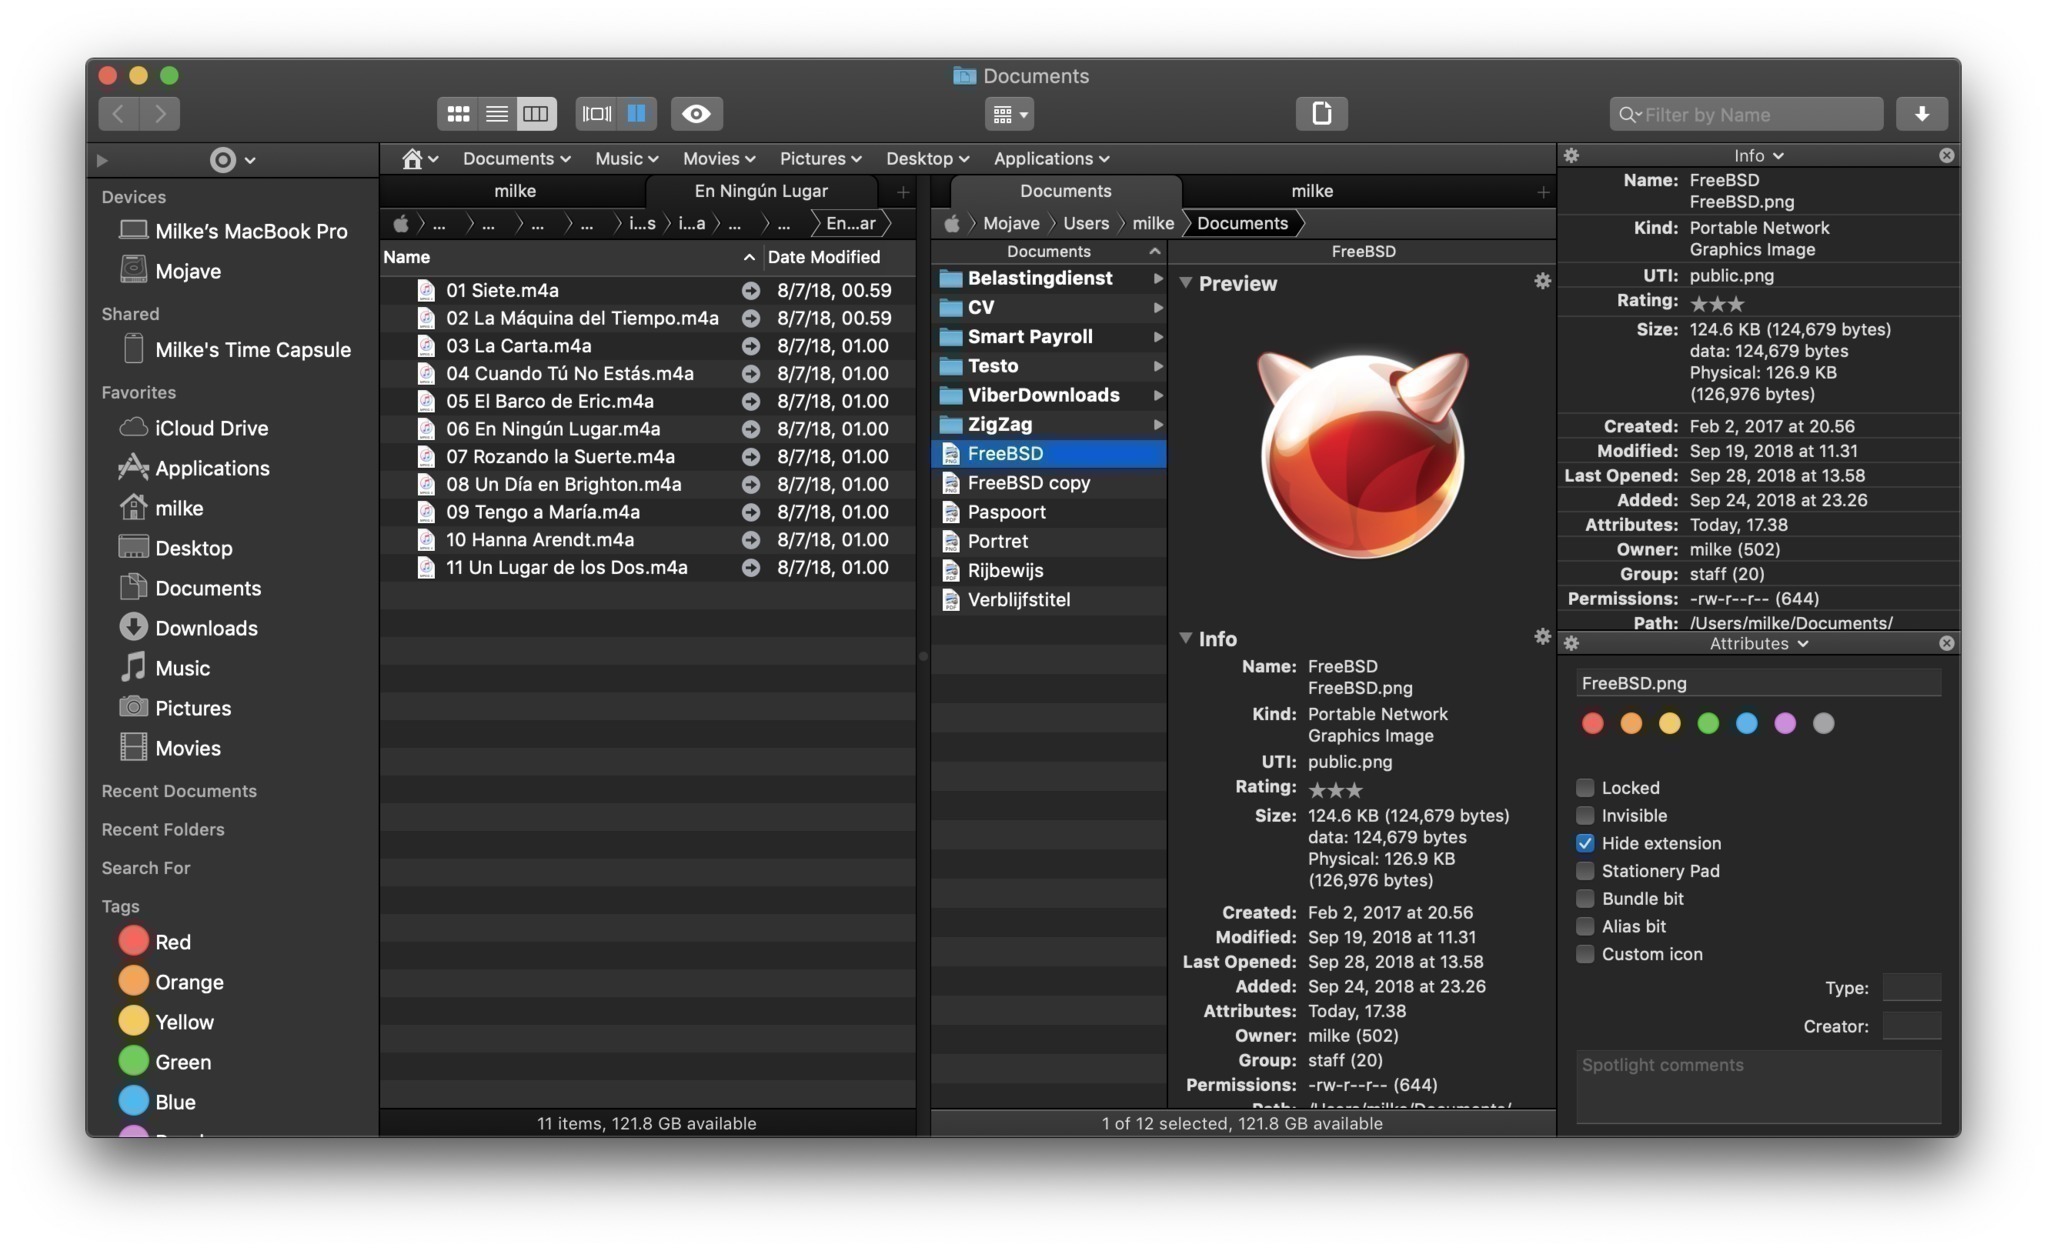 download free graphic design software for mac